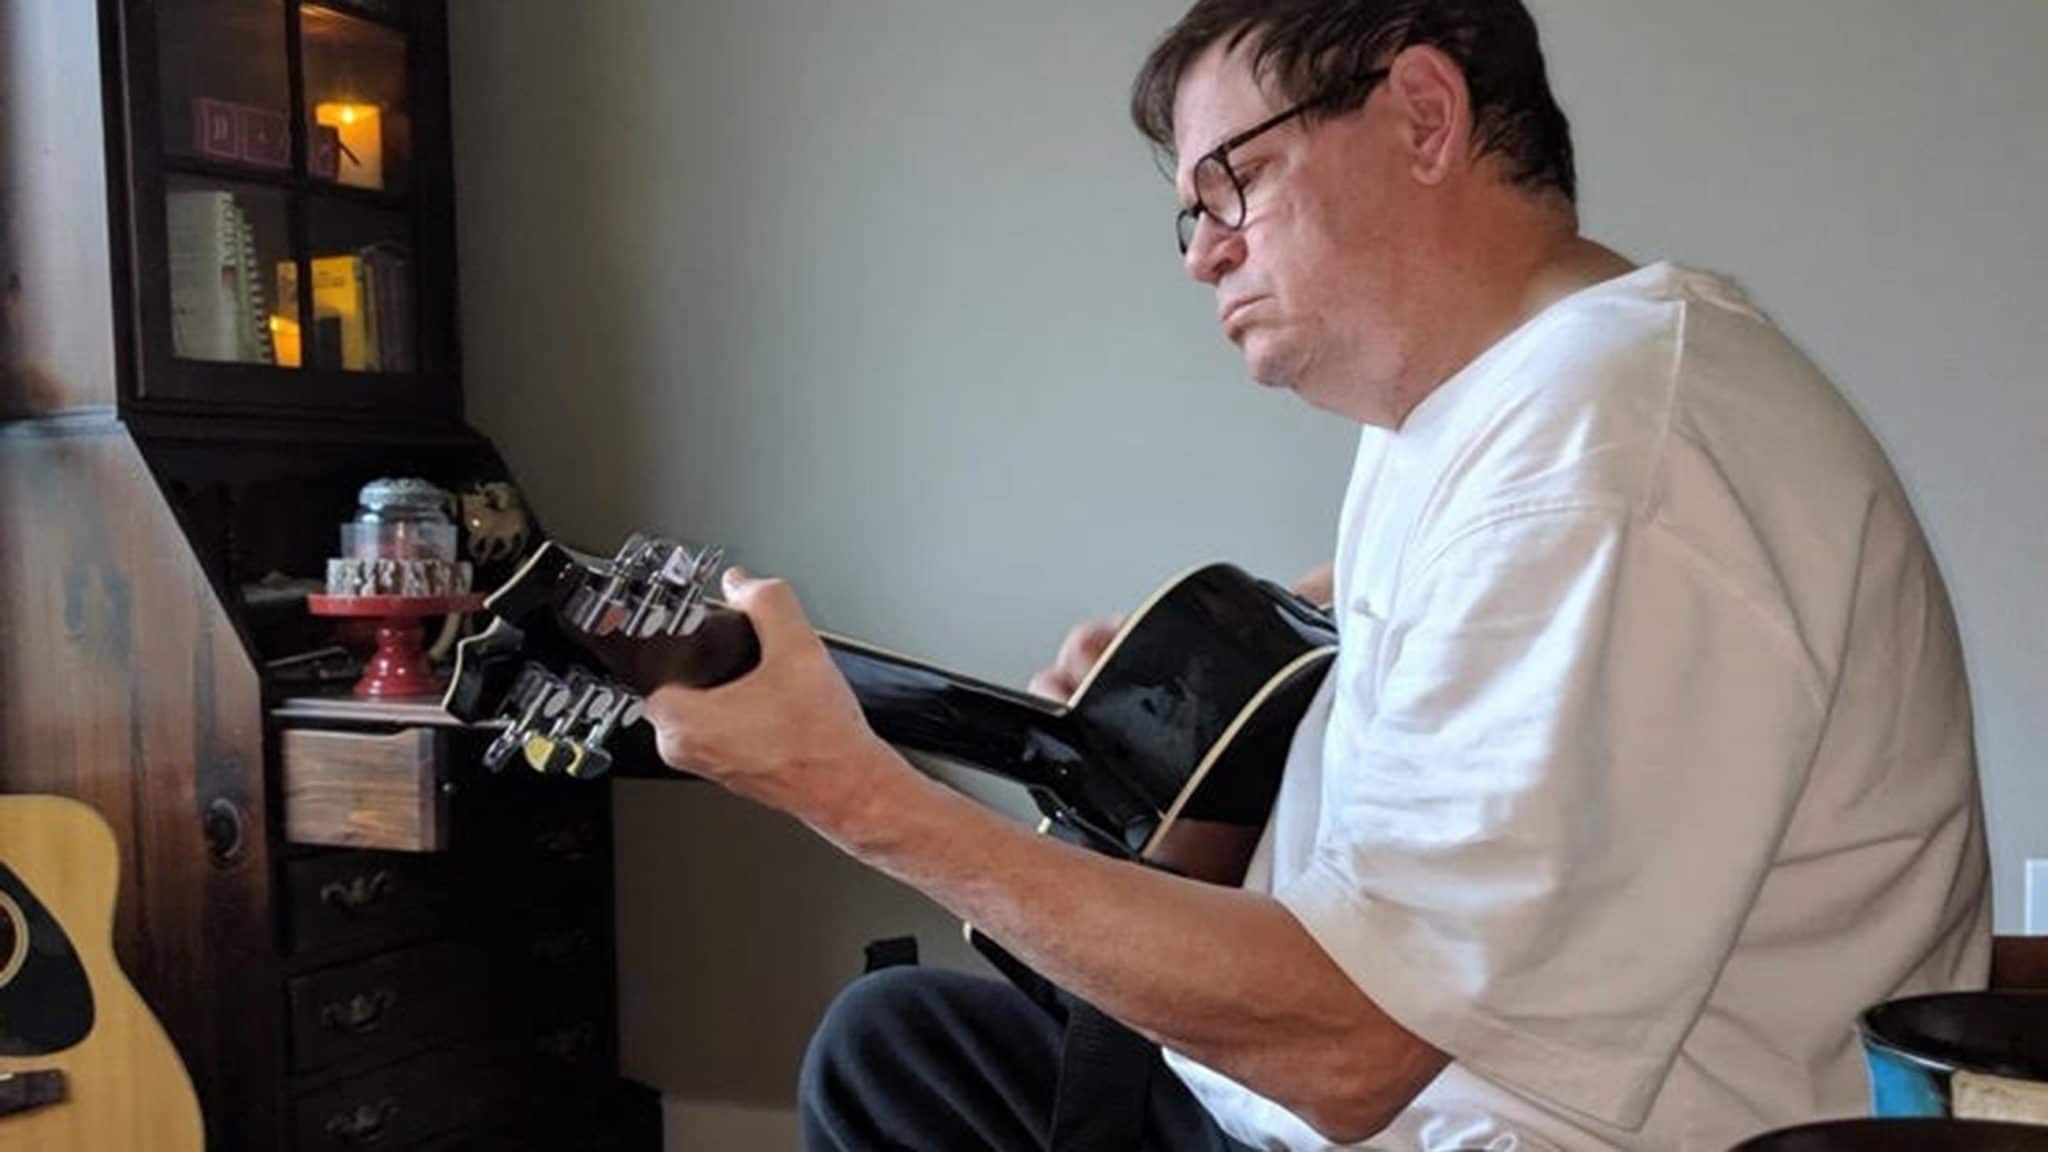 Tenino, Washington police chief Bob Swain playing guitar at home in June. Earlier in the year he was told his kidneys were failing and dialysis was necessary. But he had other plans.